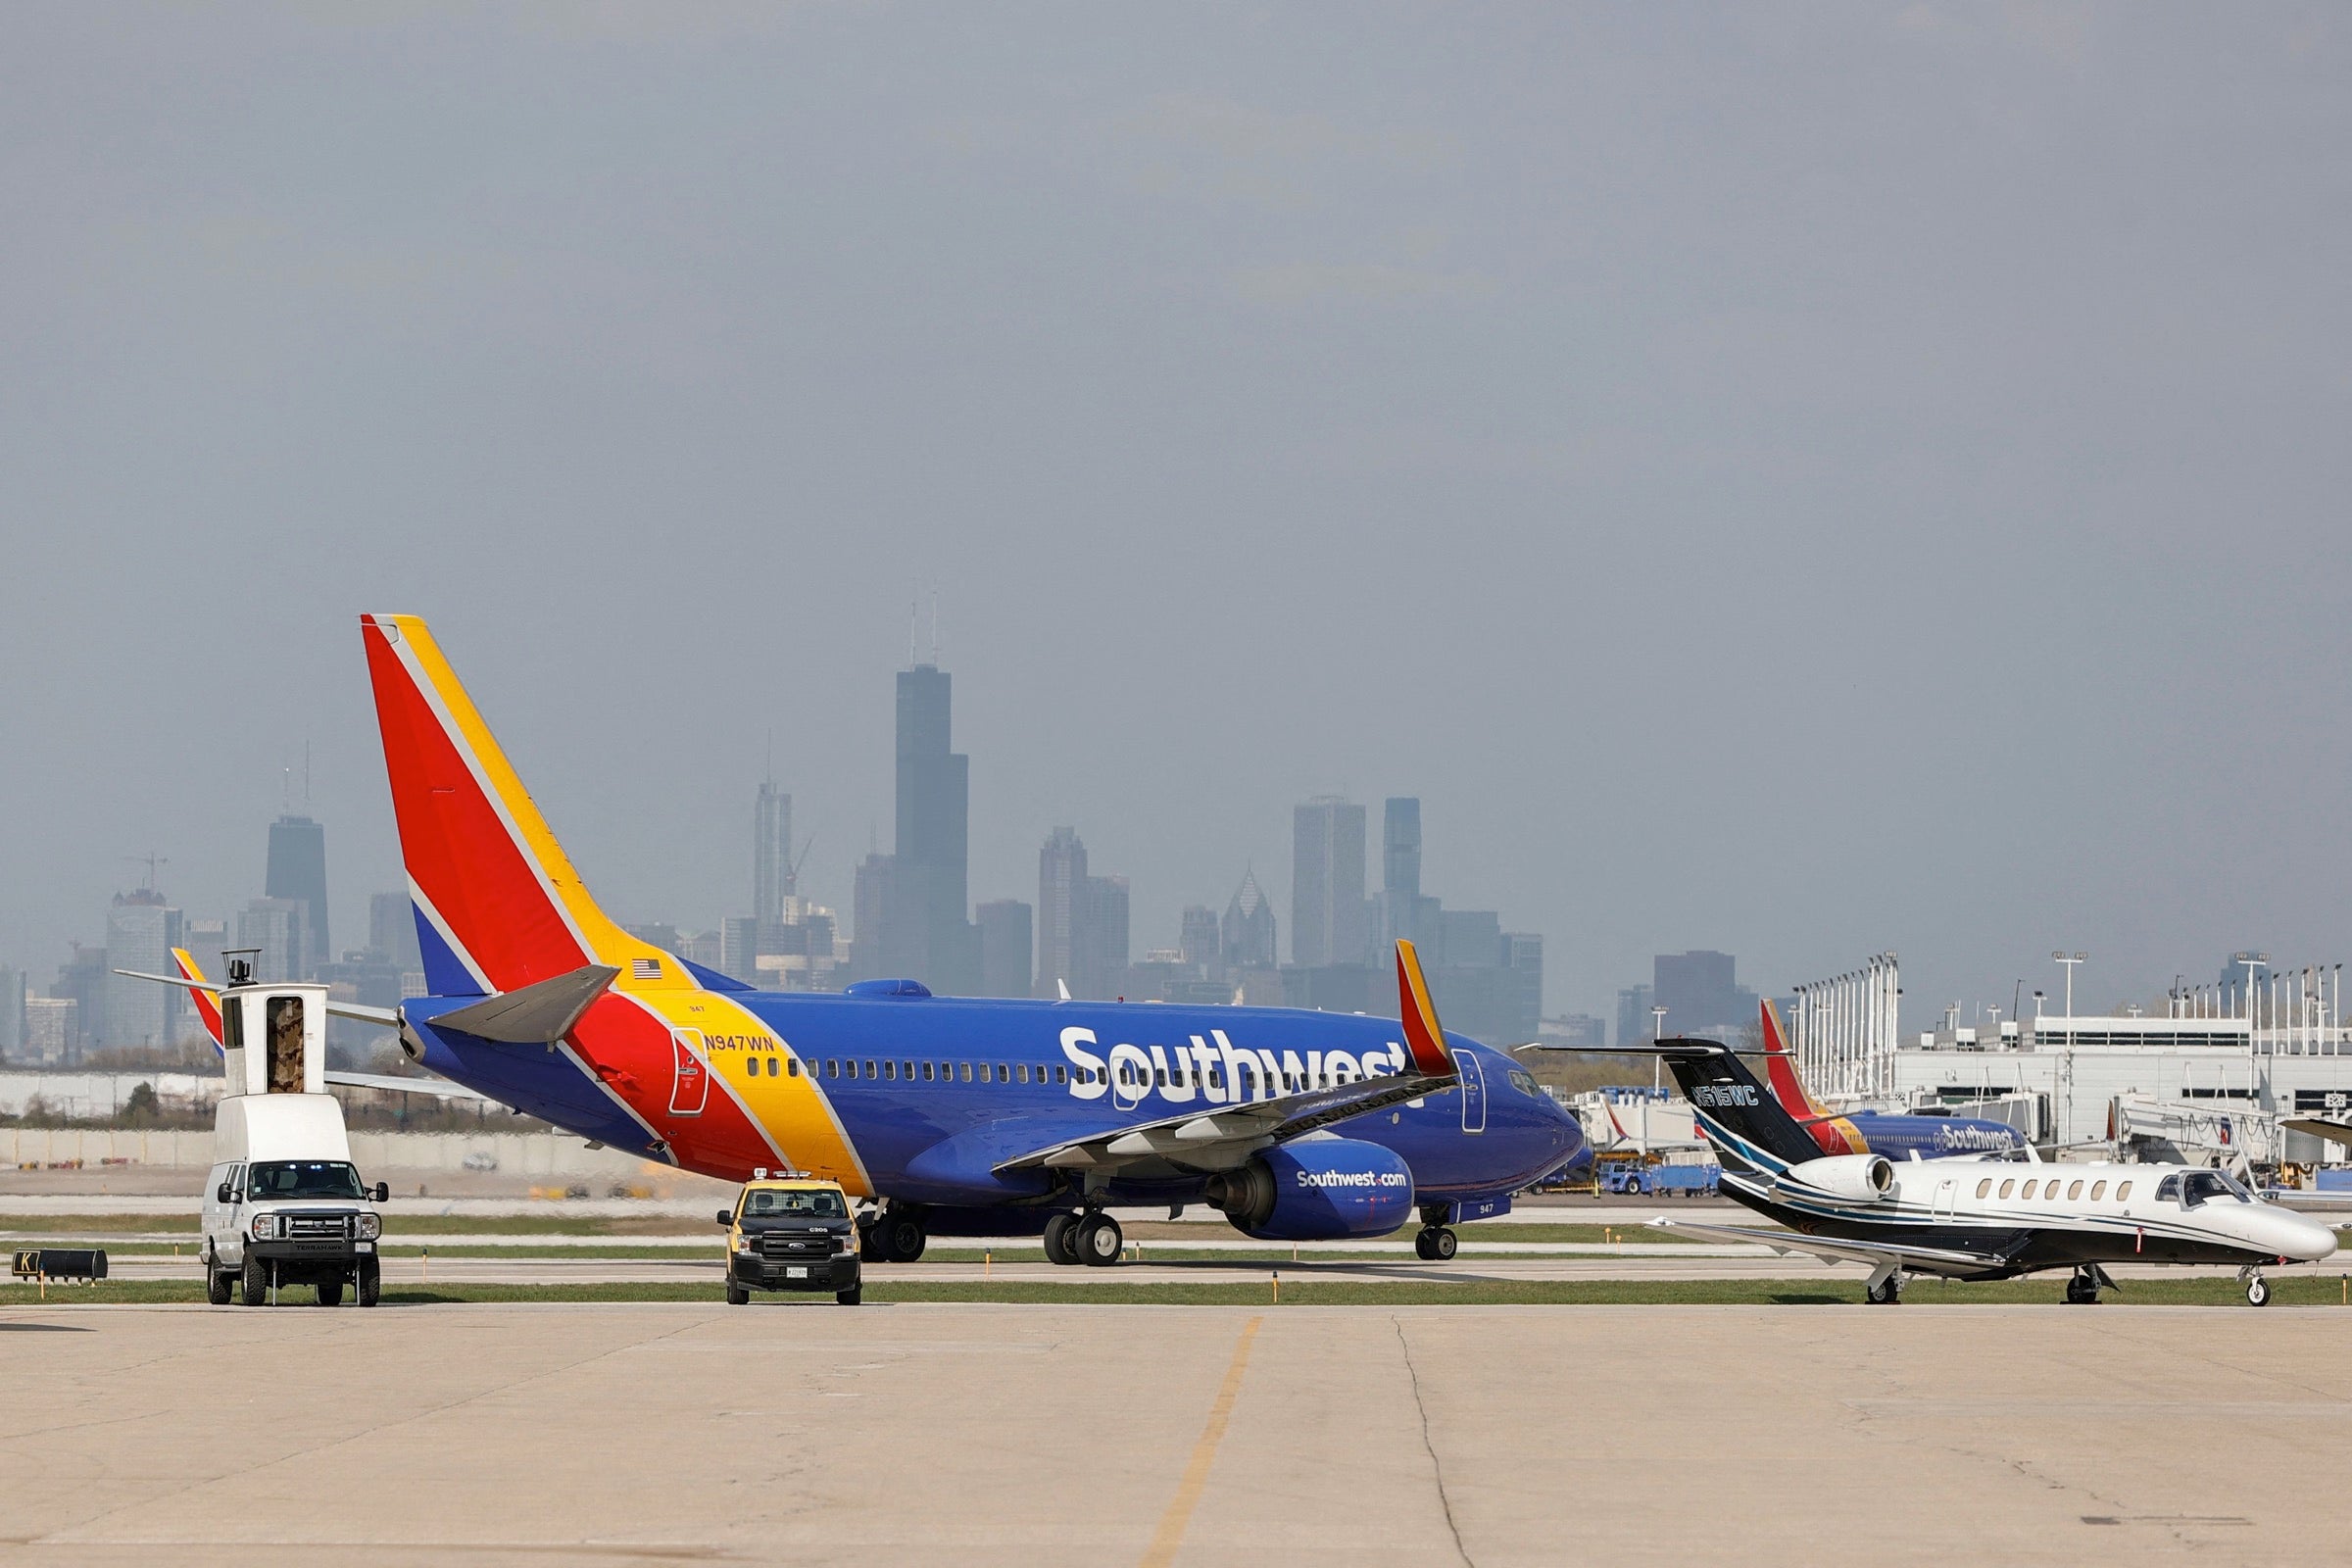 Southwest Boeing 737 taxxing at Chicago Midway International Airport